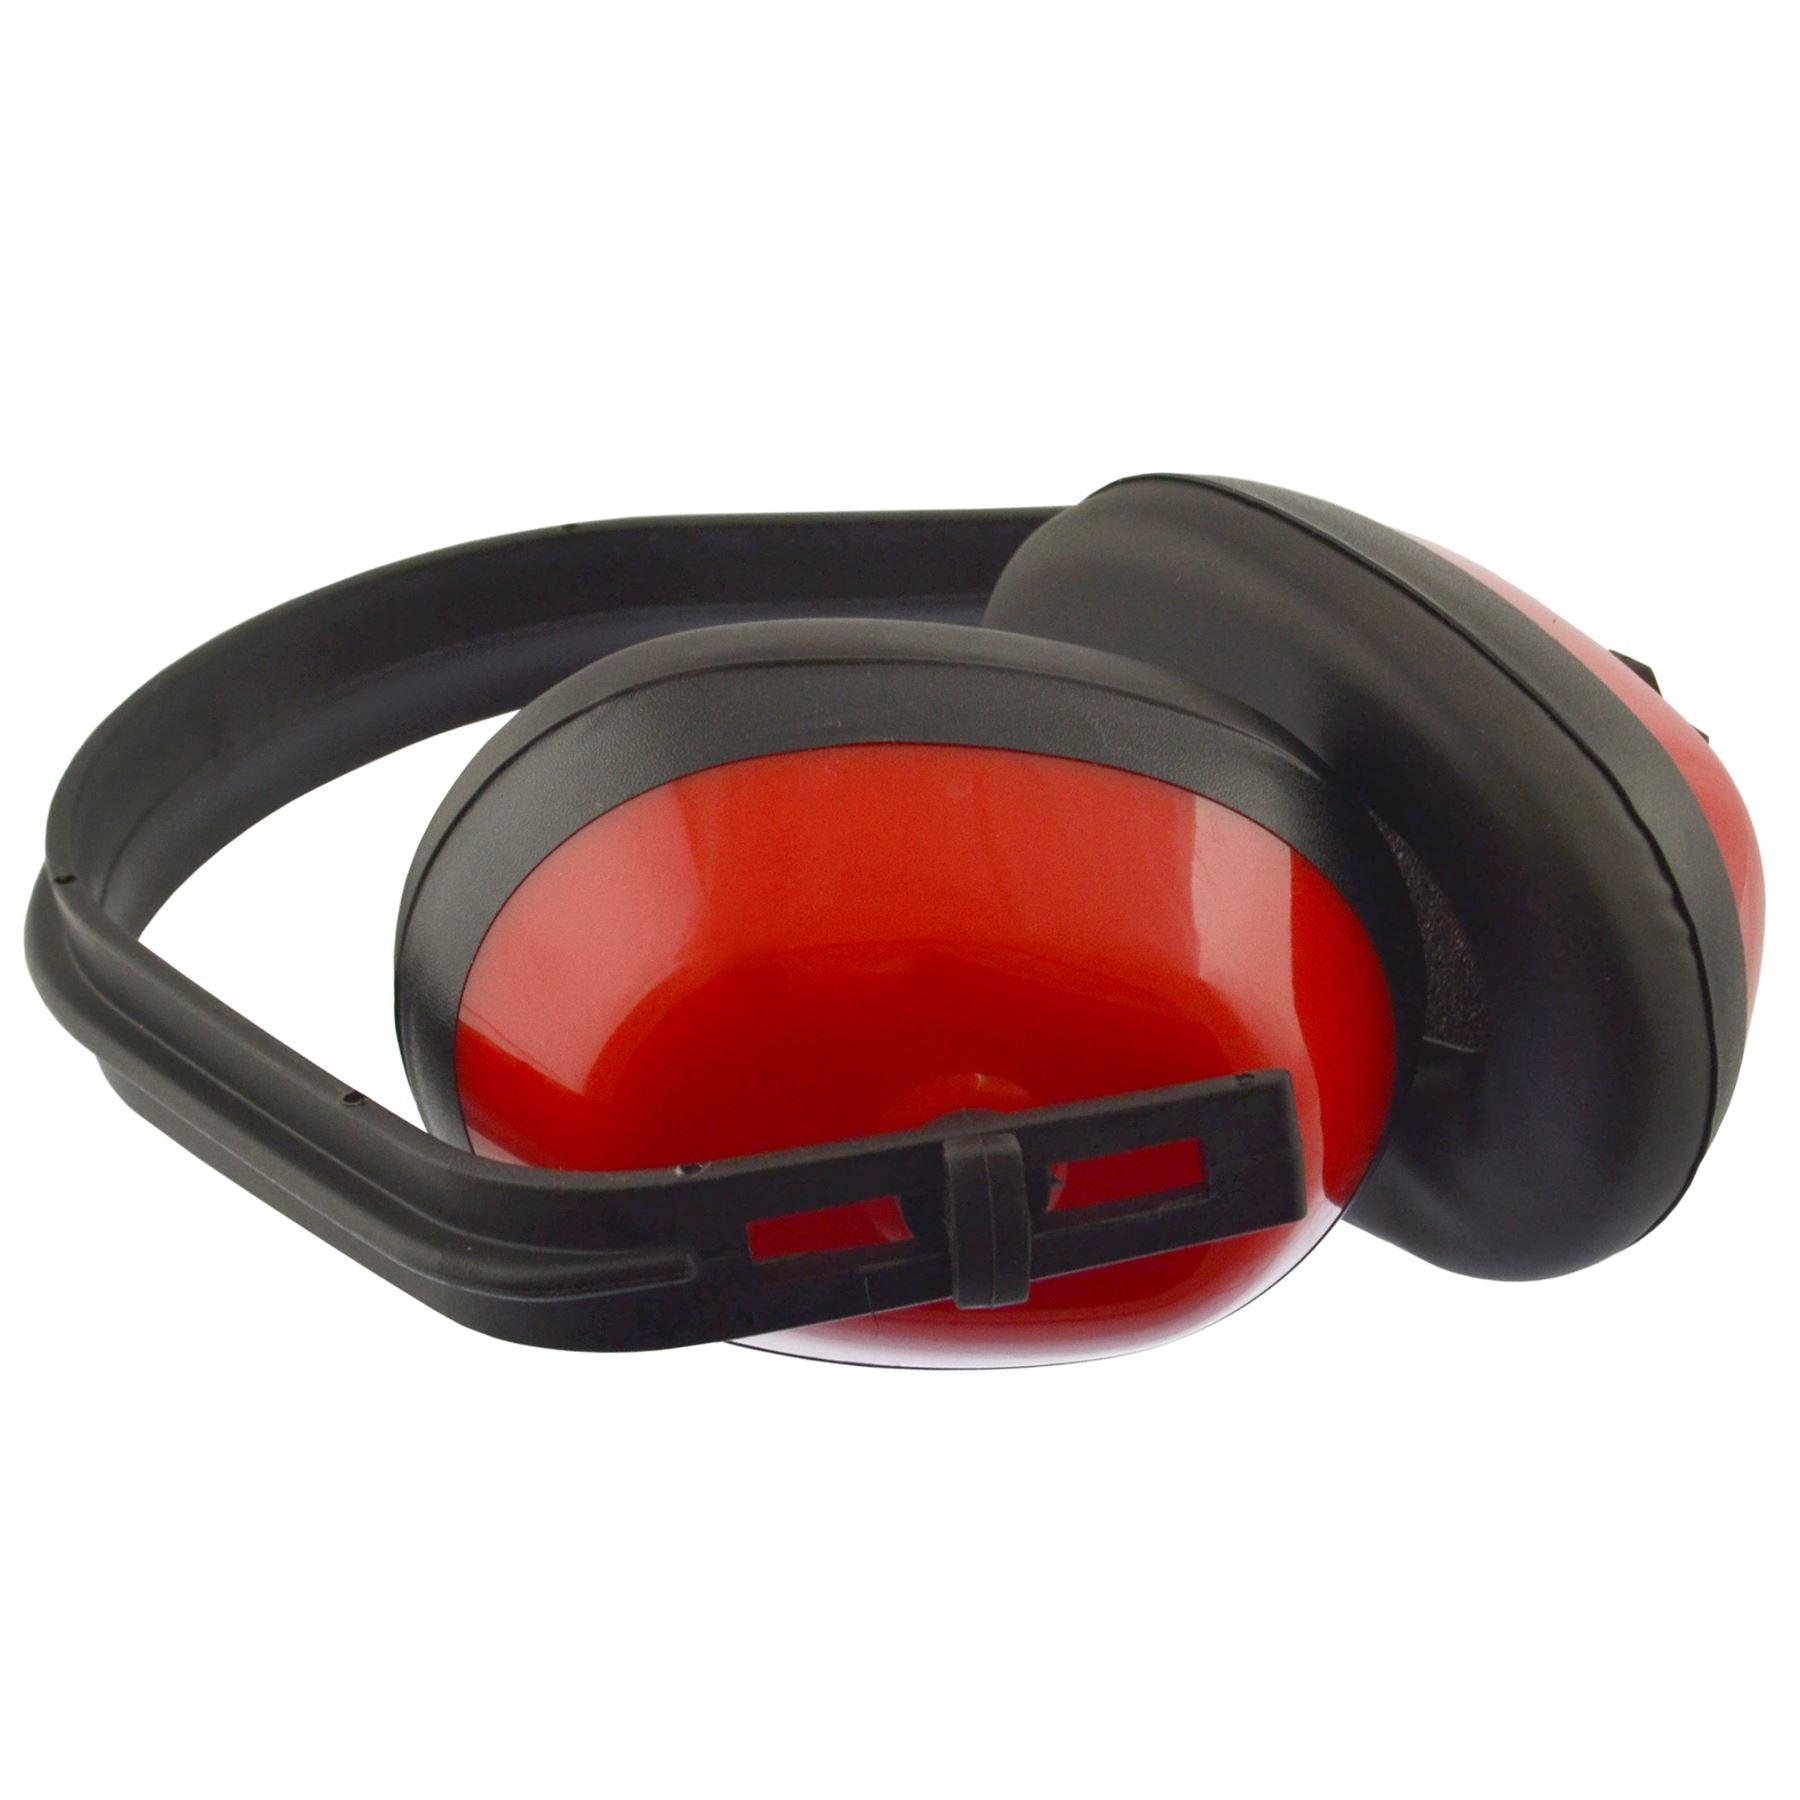 Ear Protectors / Defenders / Muffs / Noise / Plugs / Safety / Adjustable TE326